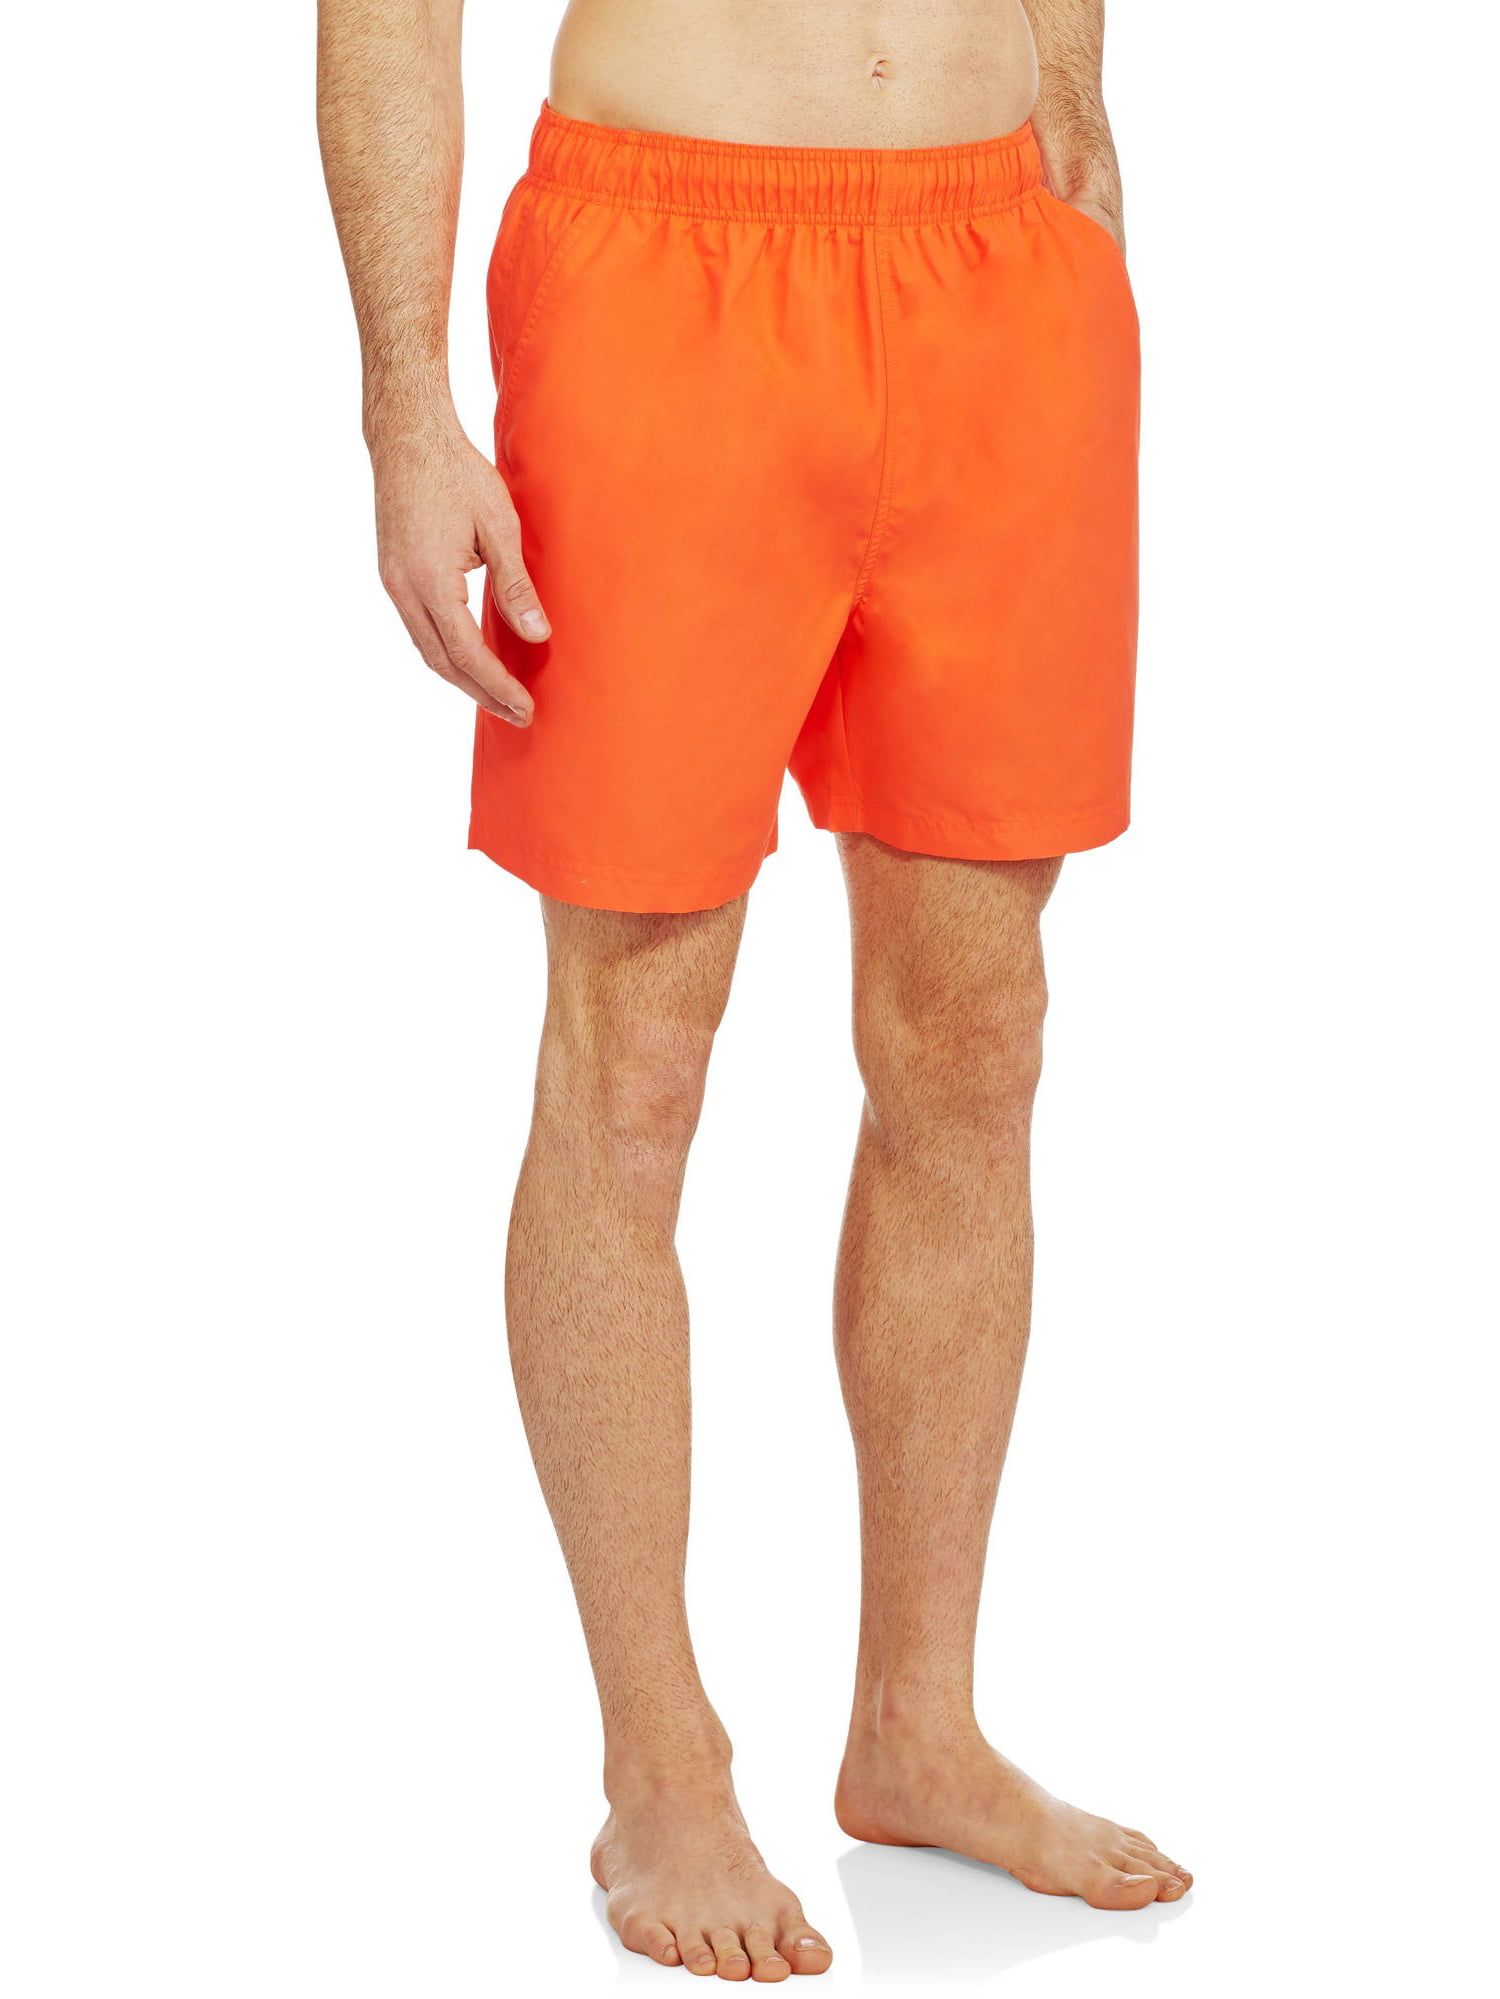 Suining Butterfly Autumn Swim Beach Trunks Cargo Shorts For Mens 